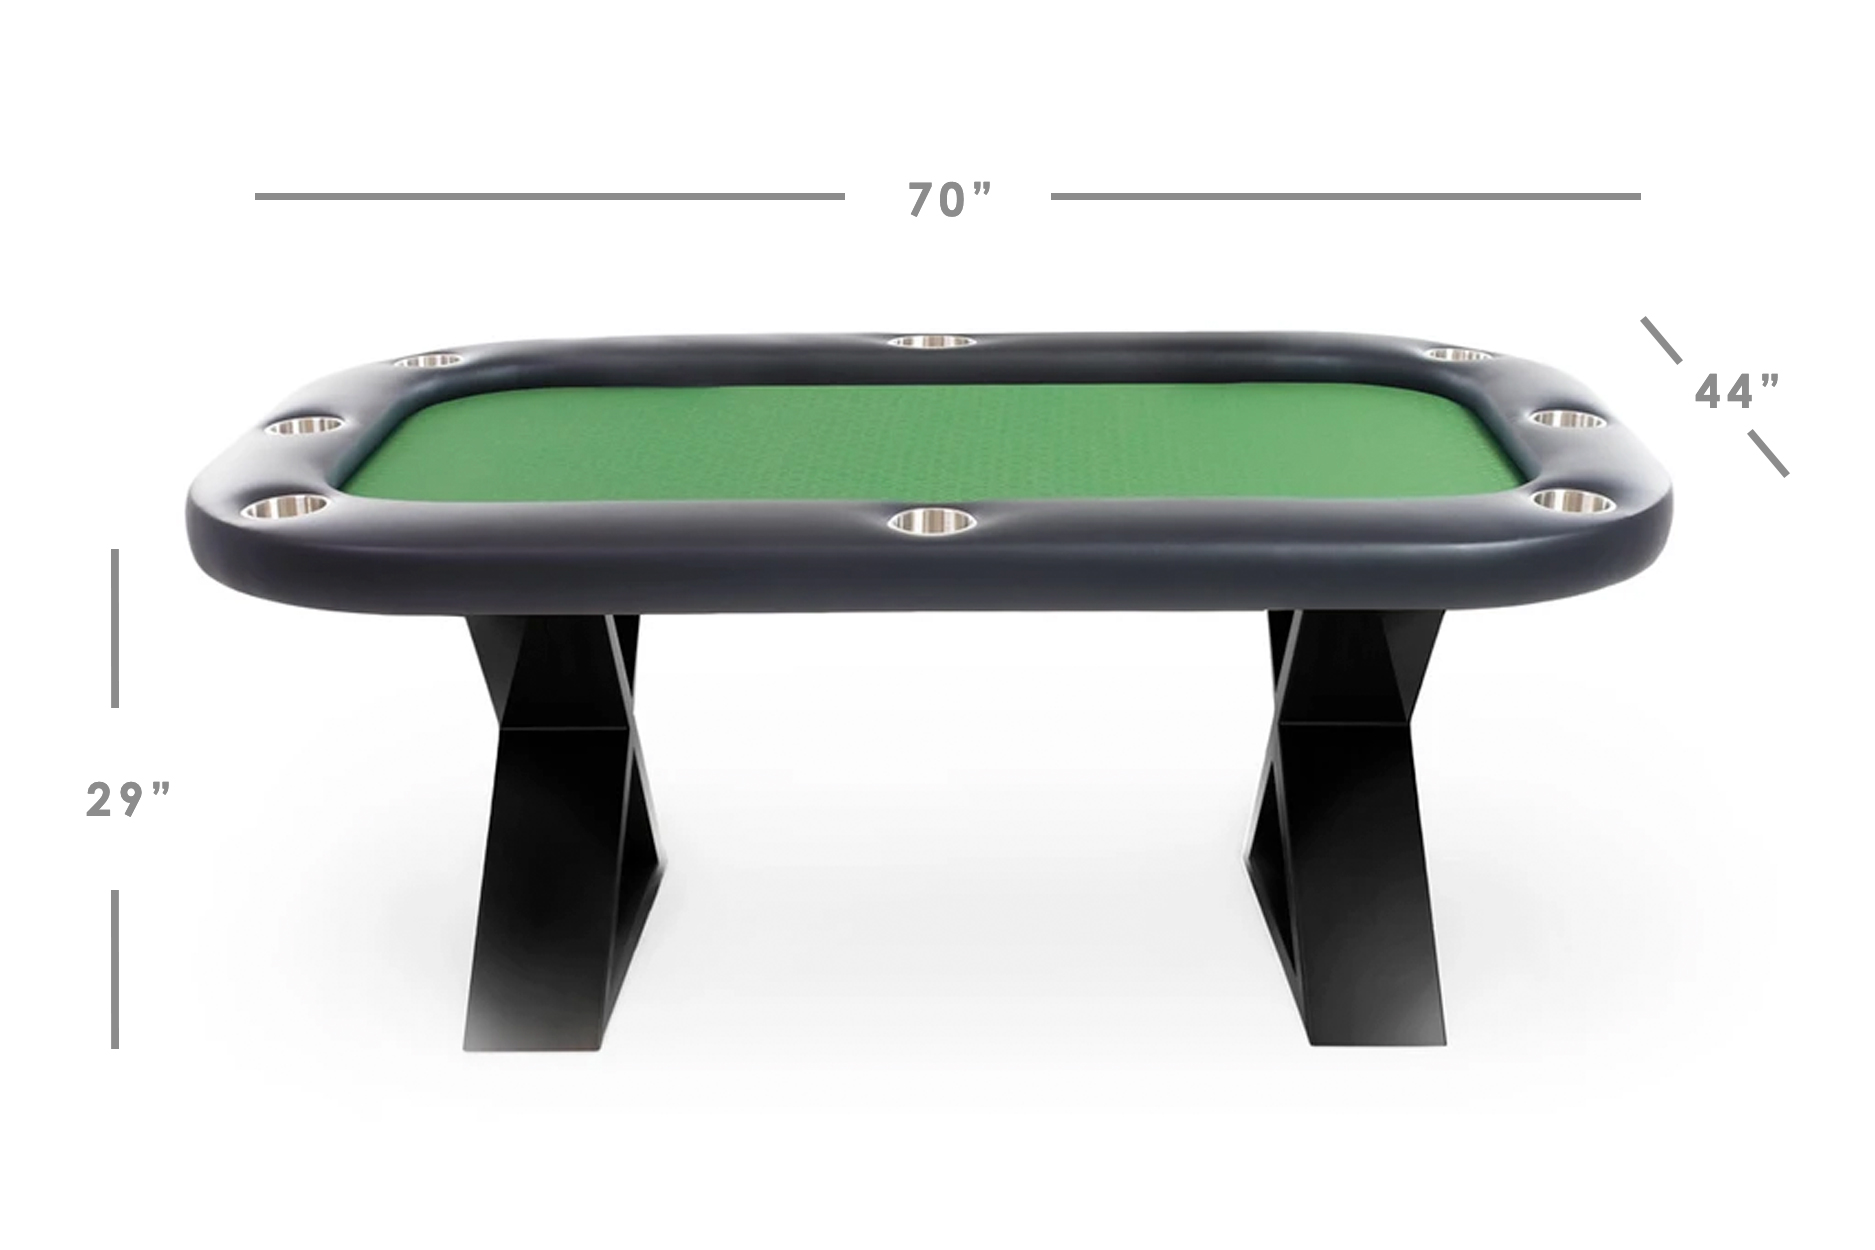 BBO Poker Helmsley Poker Table for 8 Players Includes Matching Dining Top 72 x 46-Inch